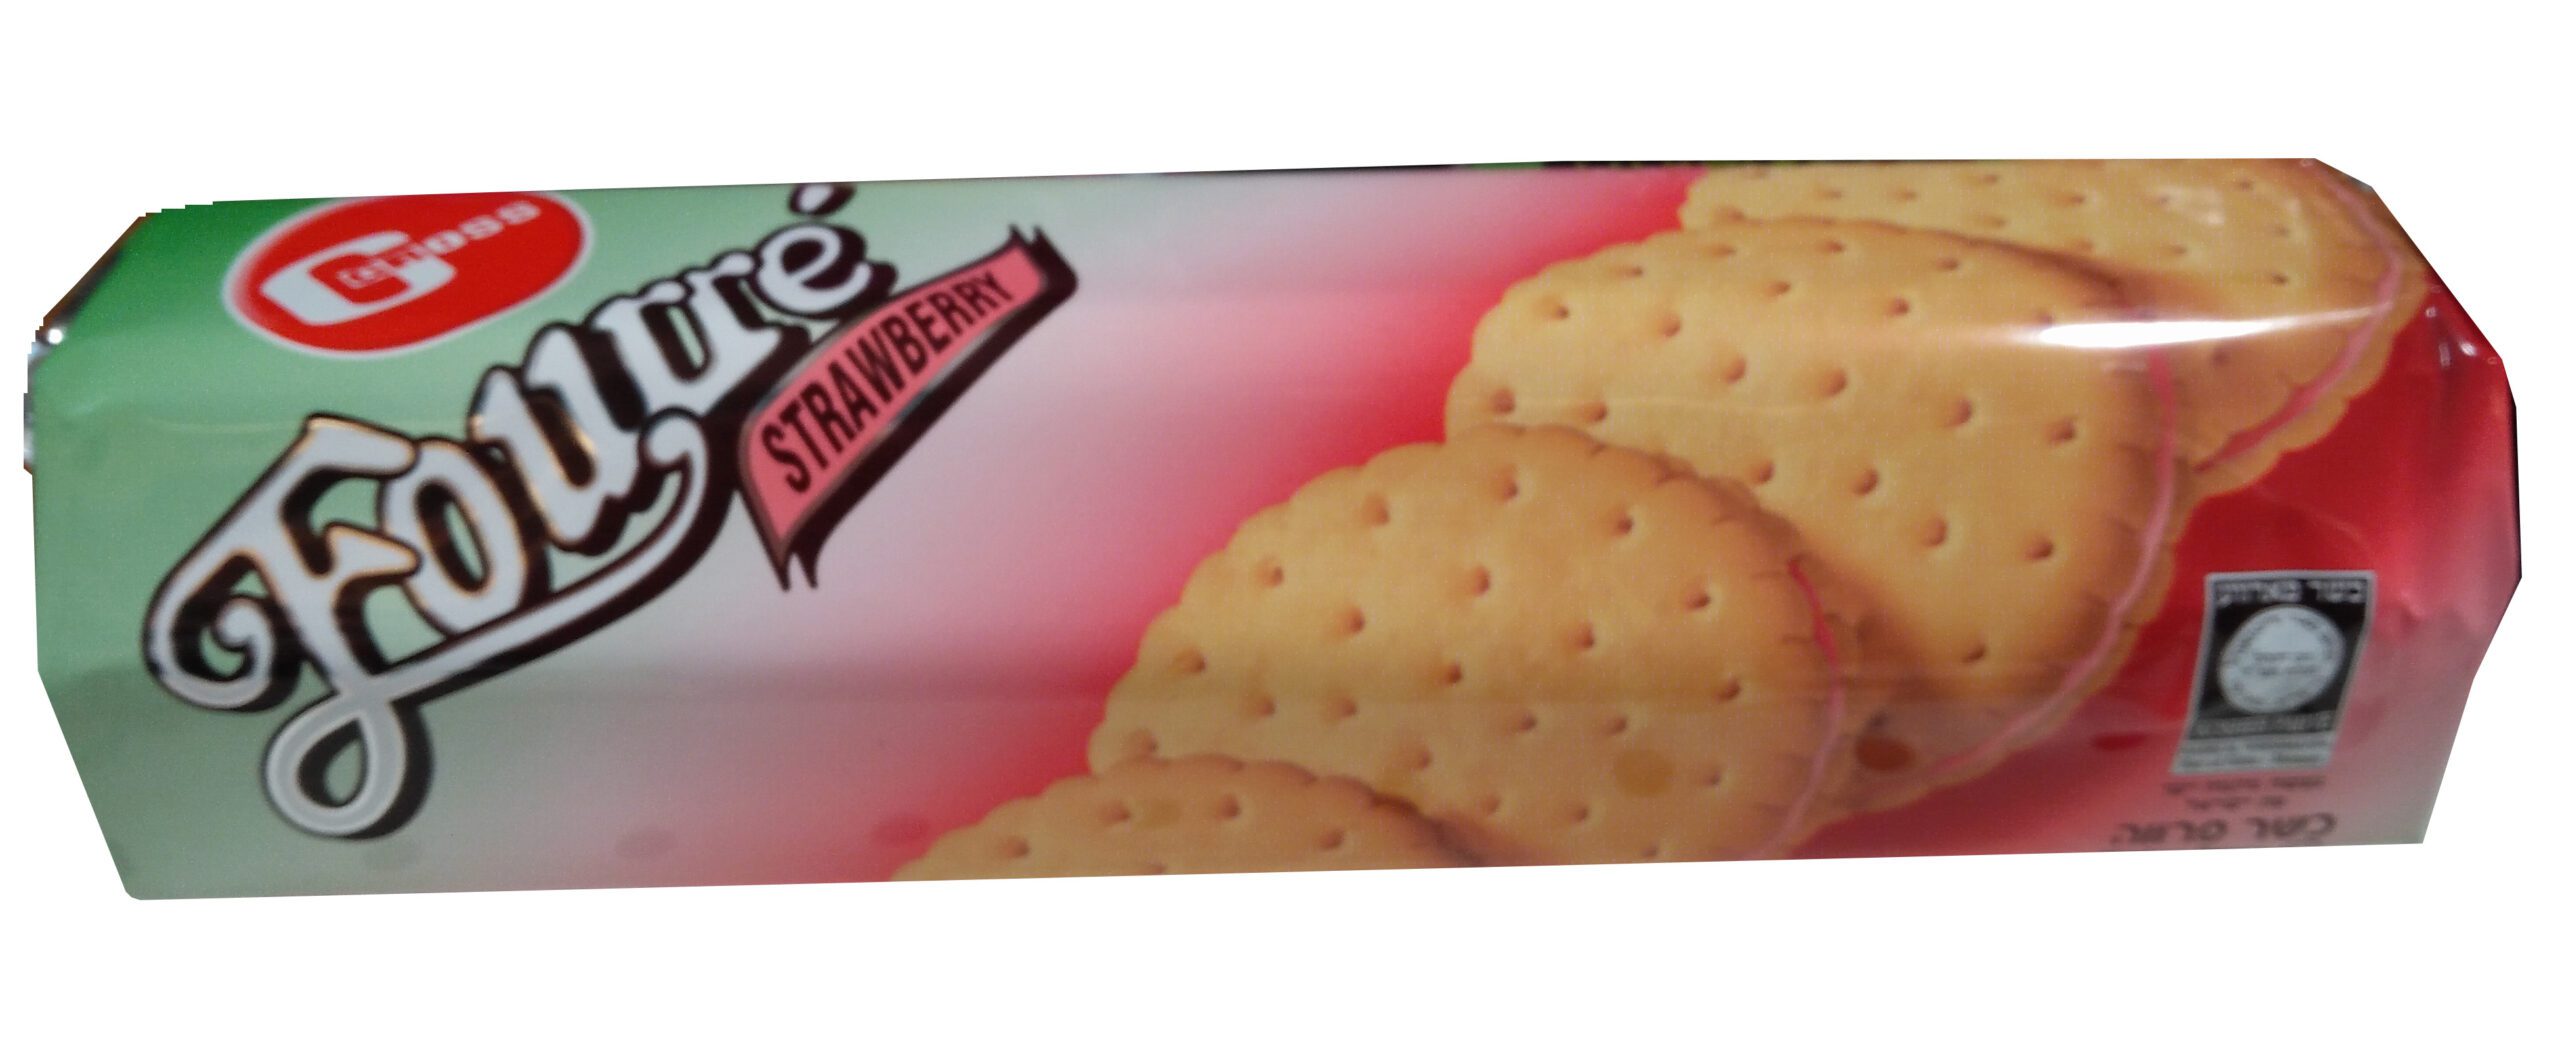 GROSS STRAWBERRY FOUREE BISCUIT